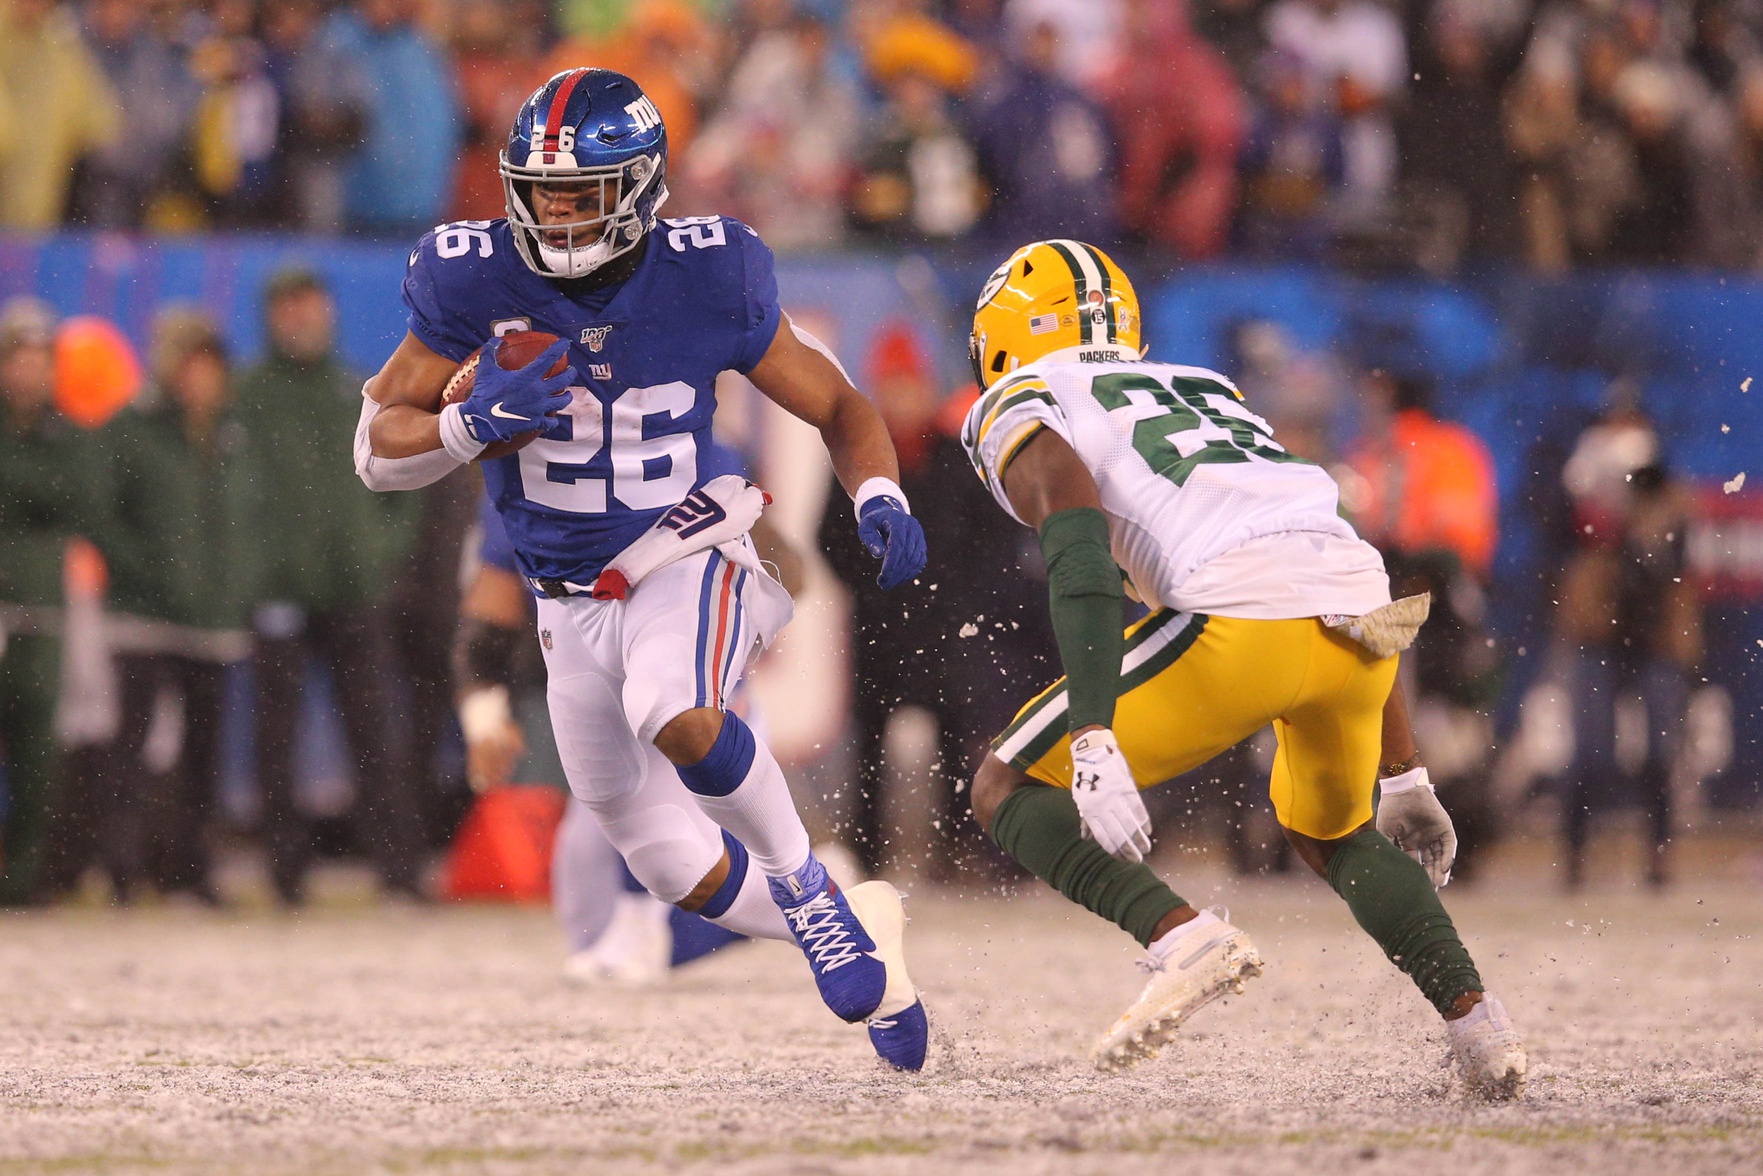 Giants vs. Packers Week 5 Preview and Prediction